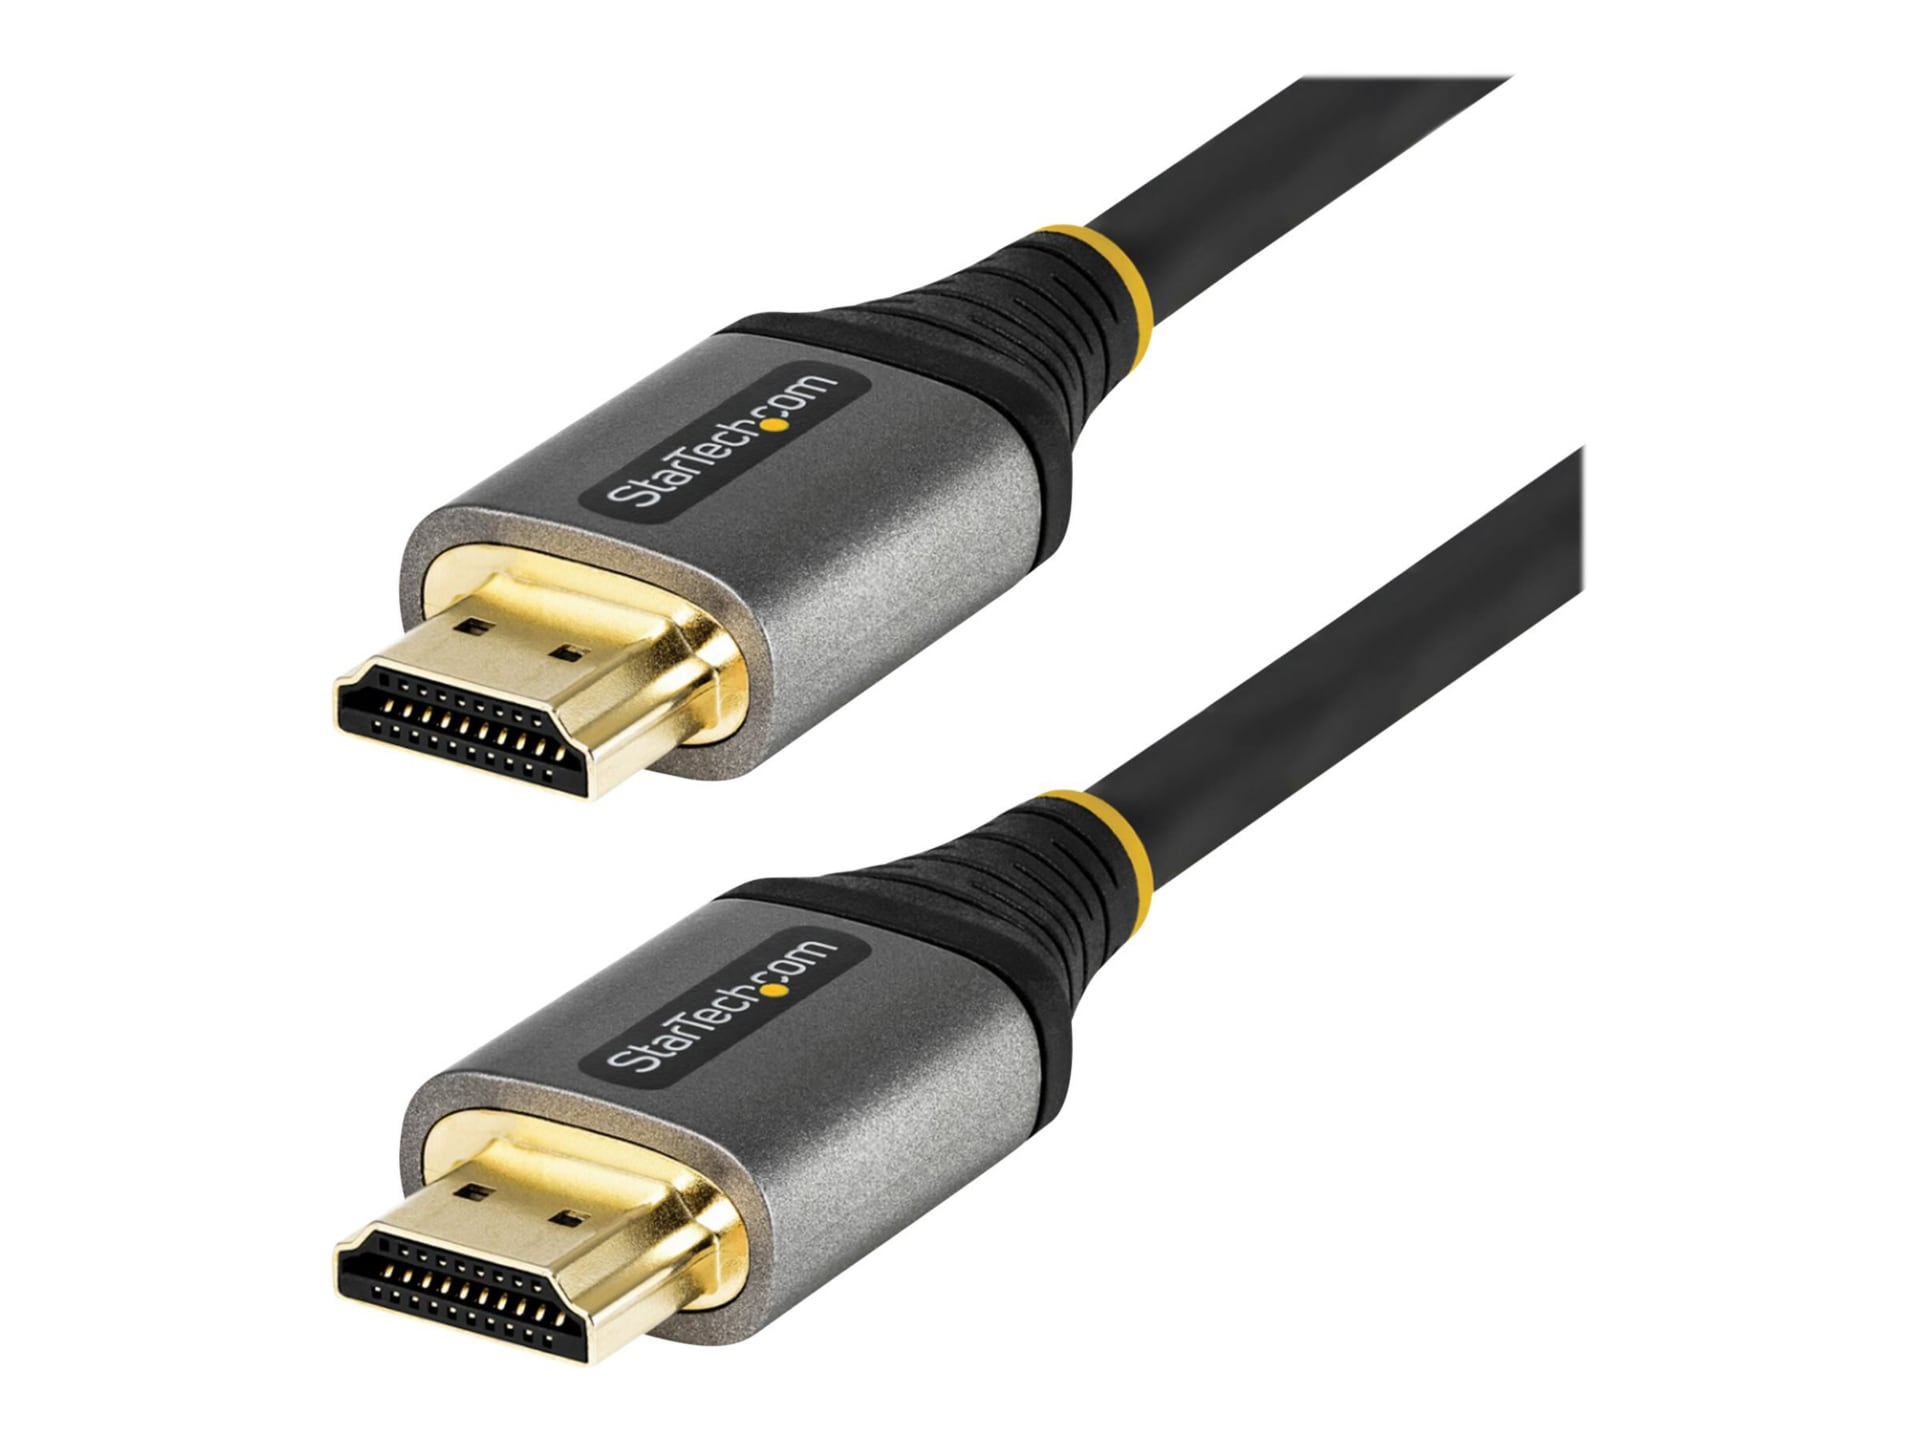 StarTech.com 10' 3m Premium Certified High Speed HDMI 2.0 Cable 4K 60Hz HDR